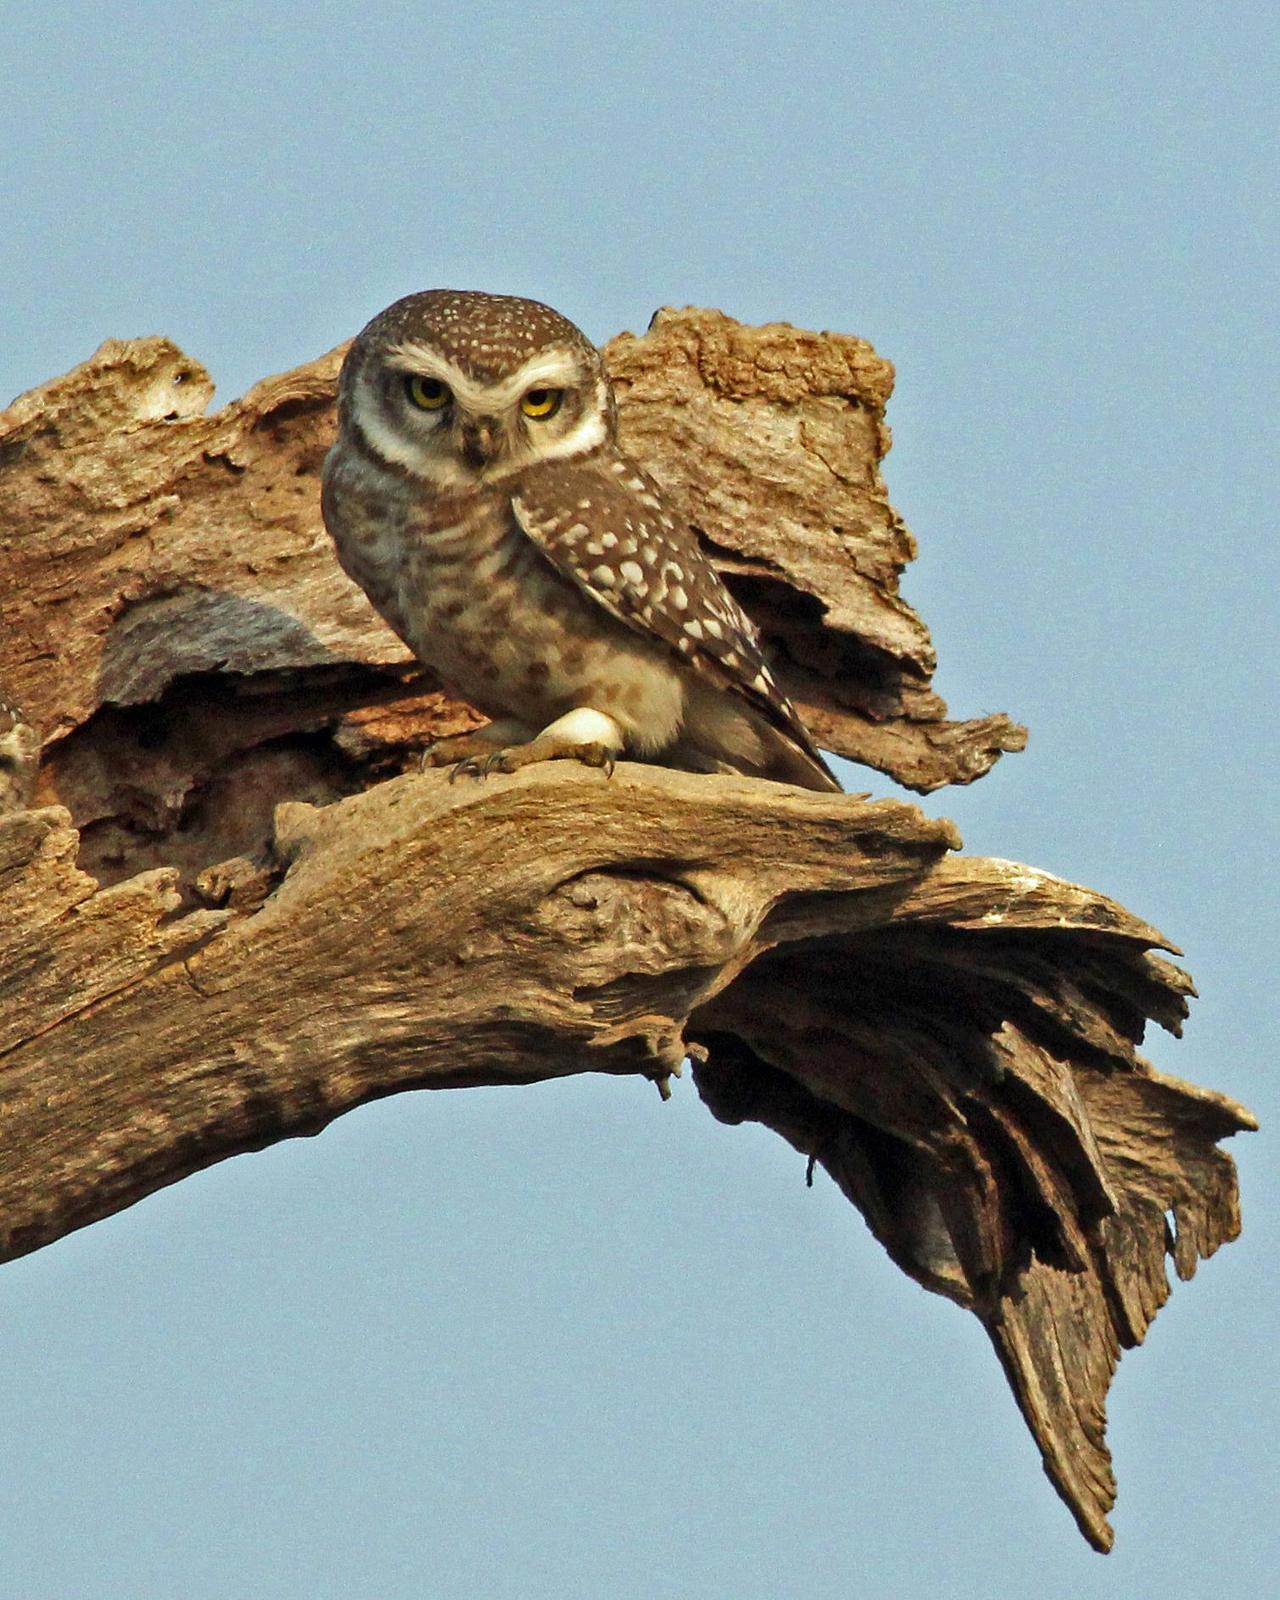 Spotted Owlet Photo by Robert Polkinghorn